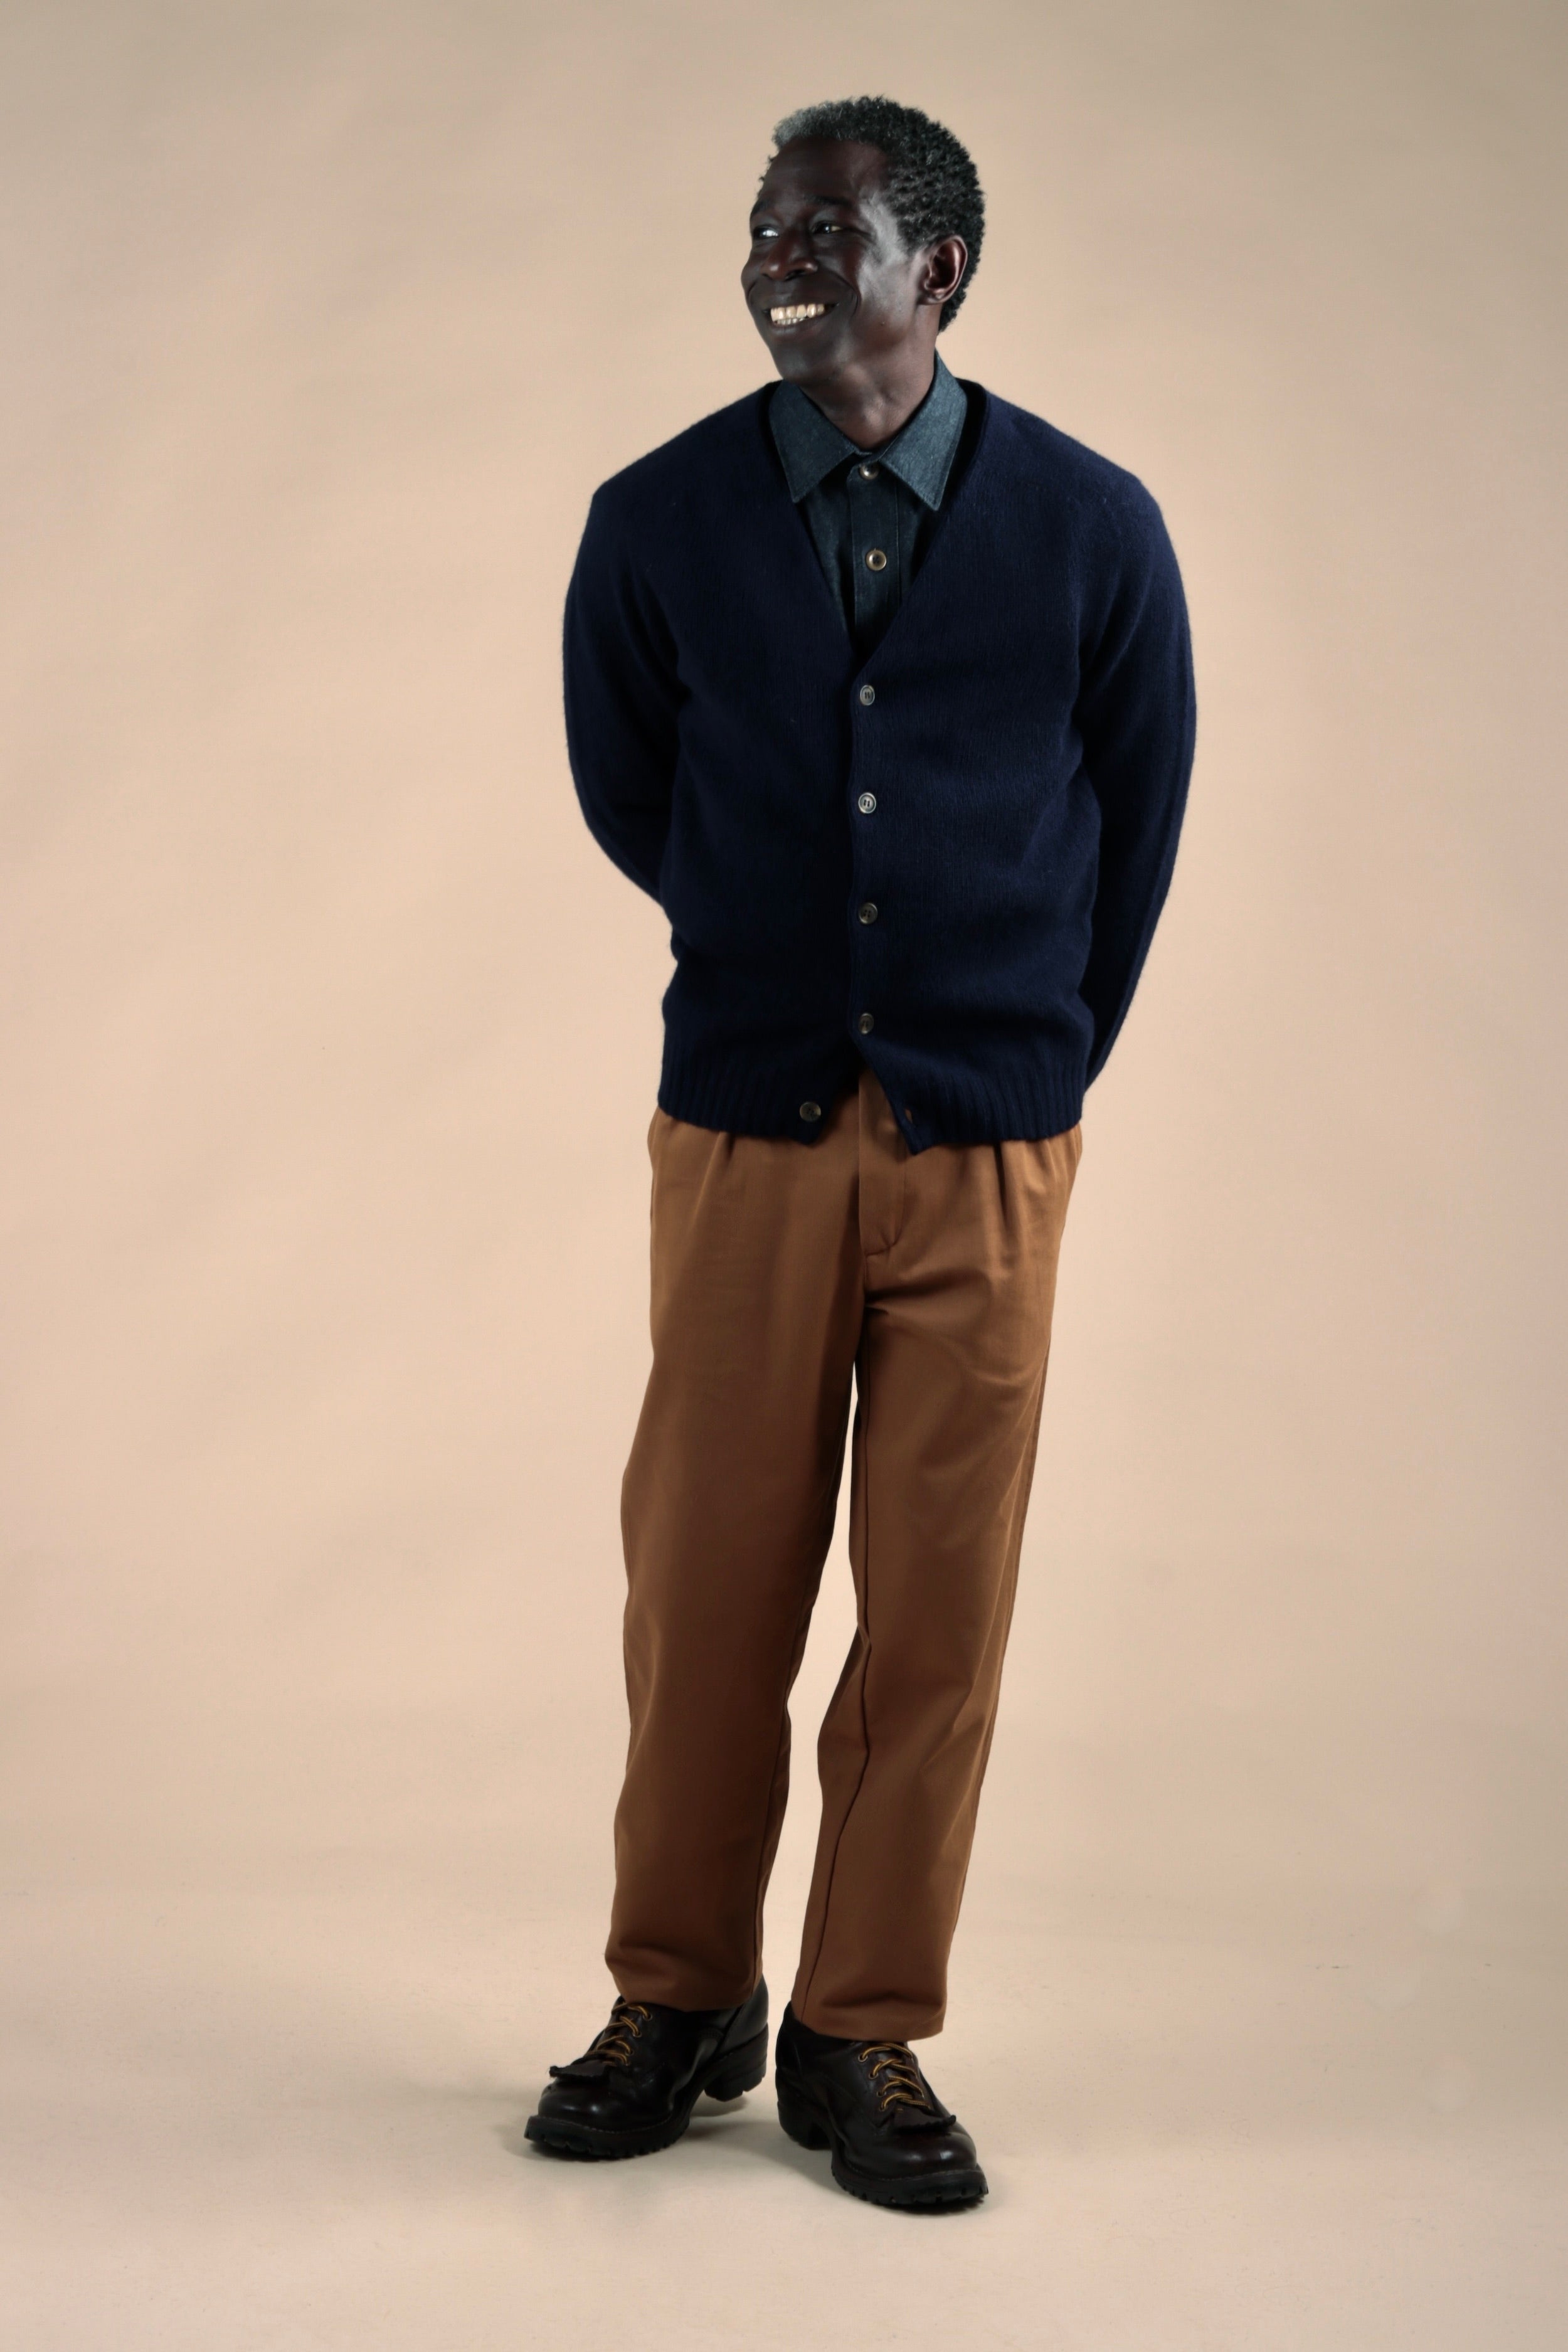 Man wears Carrier Company Navy Cardigan with Denim Collar Shirt and Classic Trousers in Tan